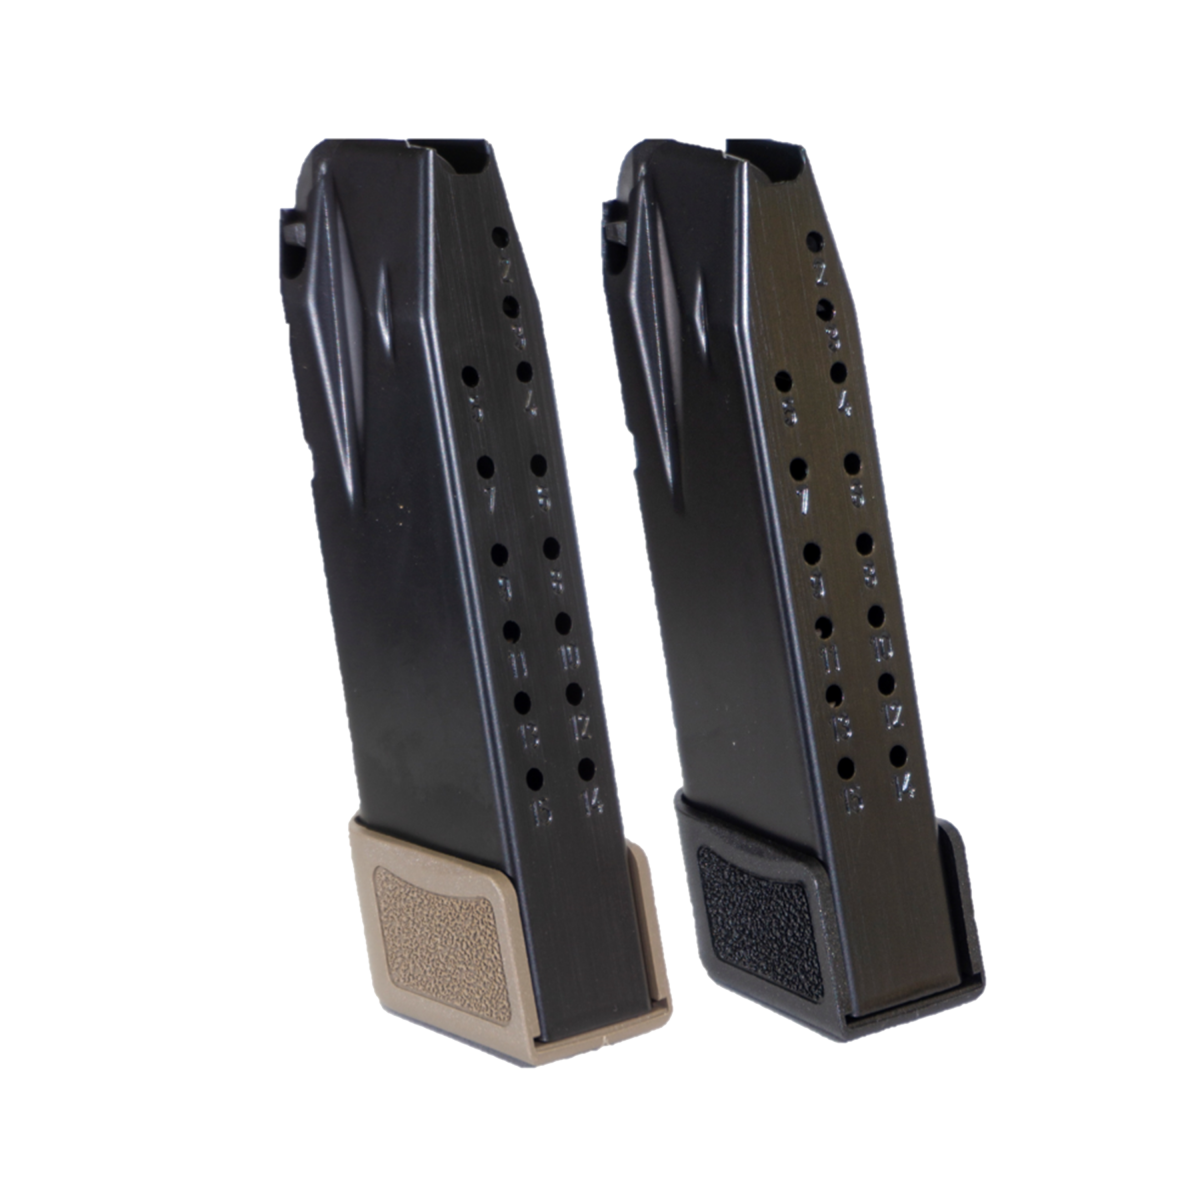 canik-mete-mc9-9mm-15-round-magazine-with-grip-extension